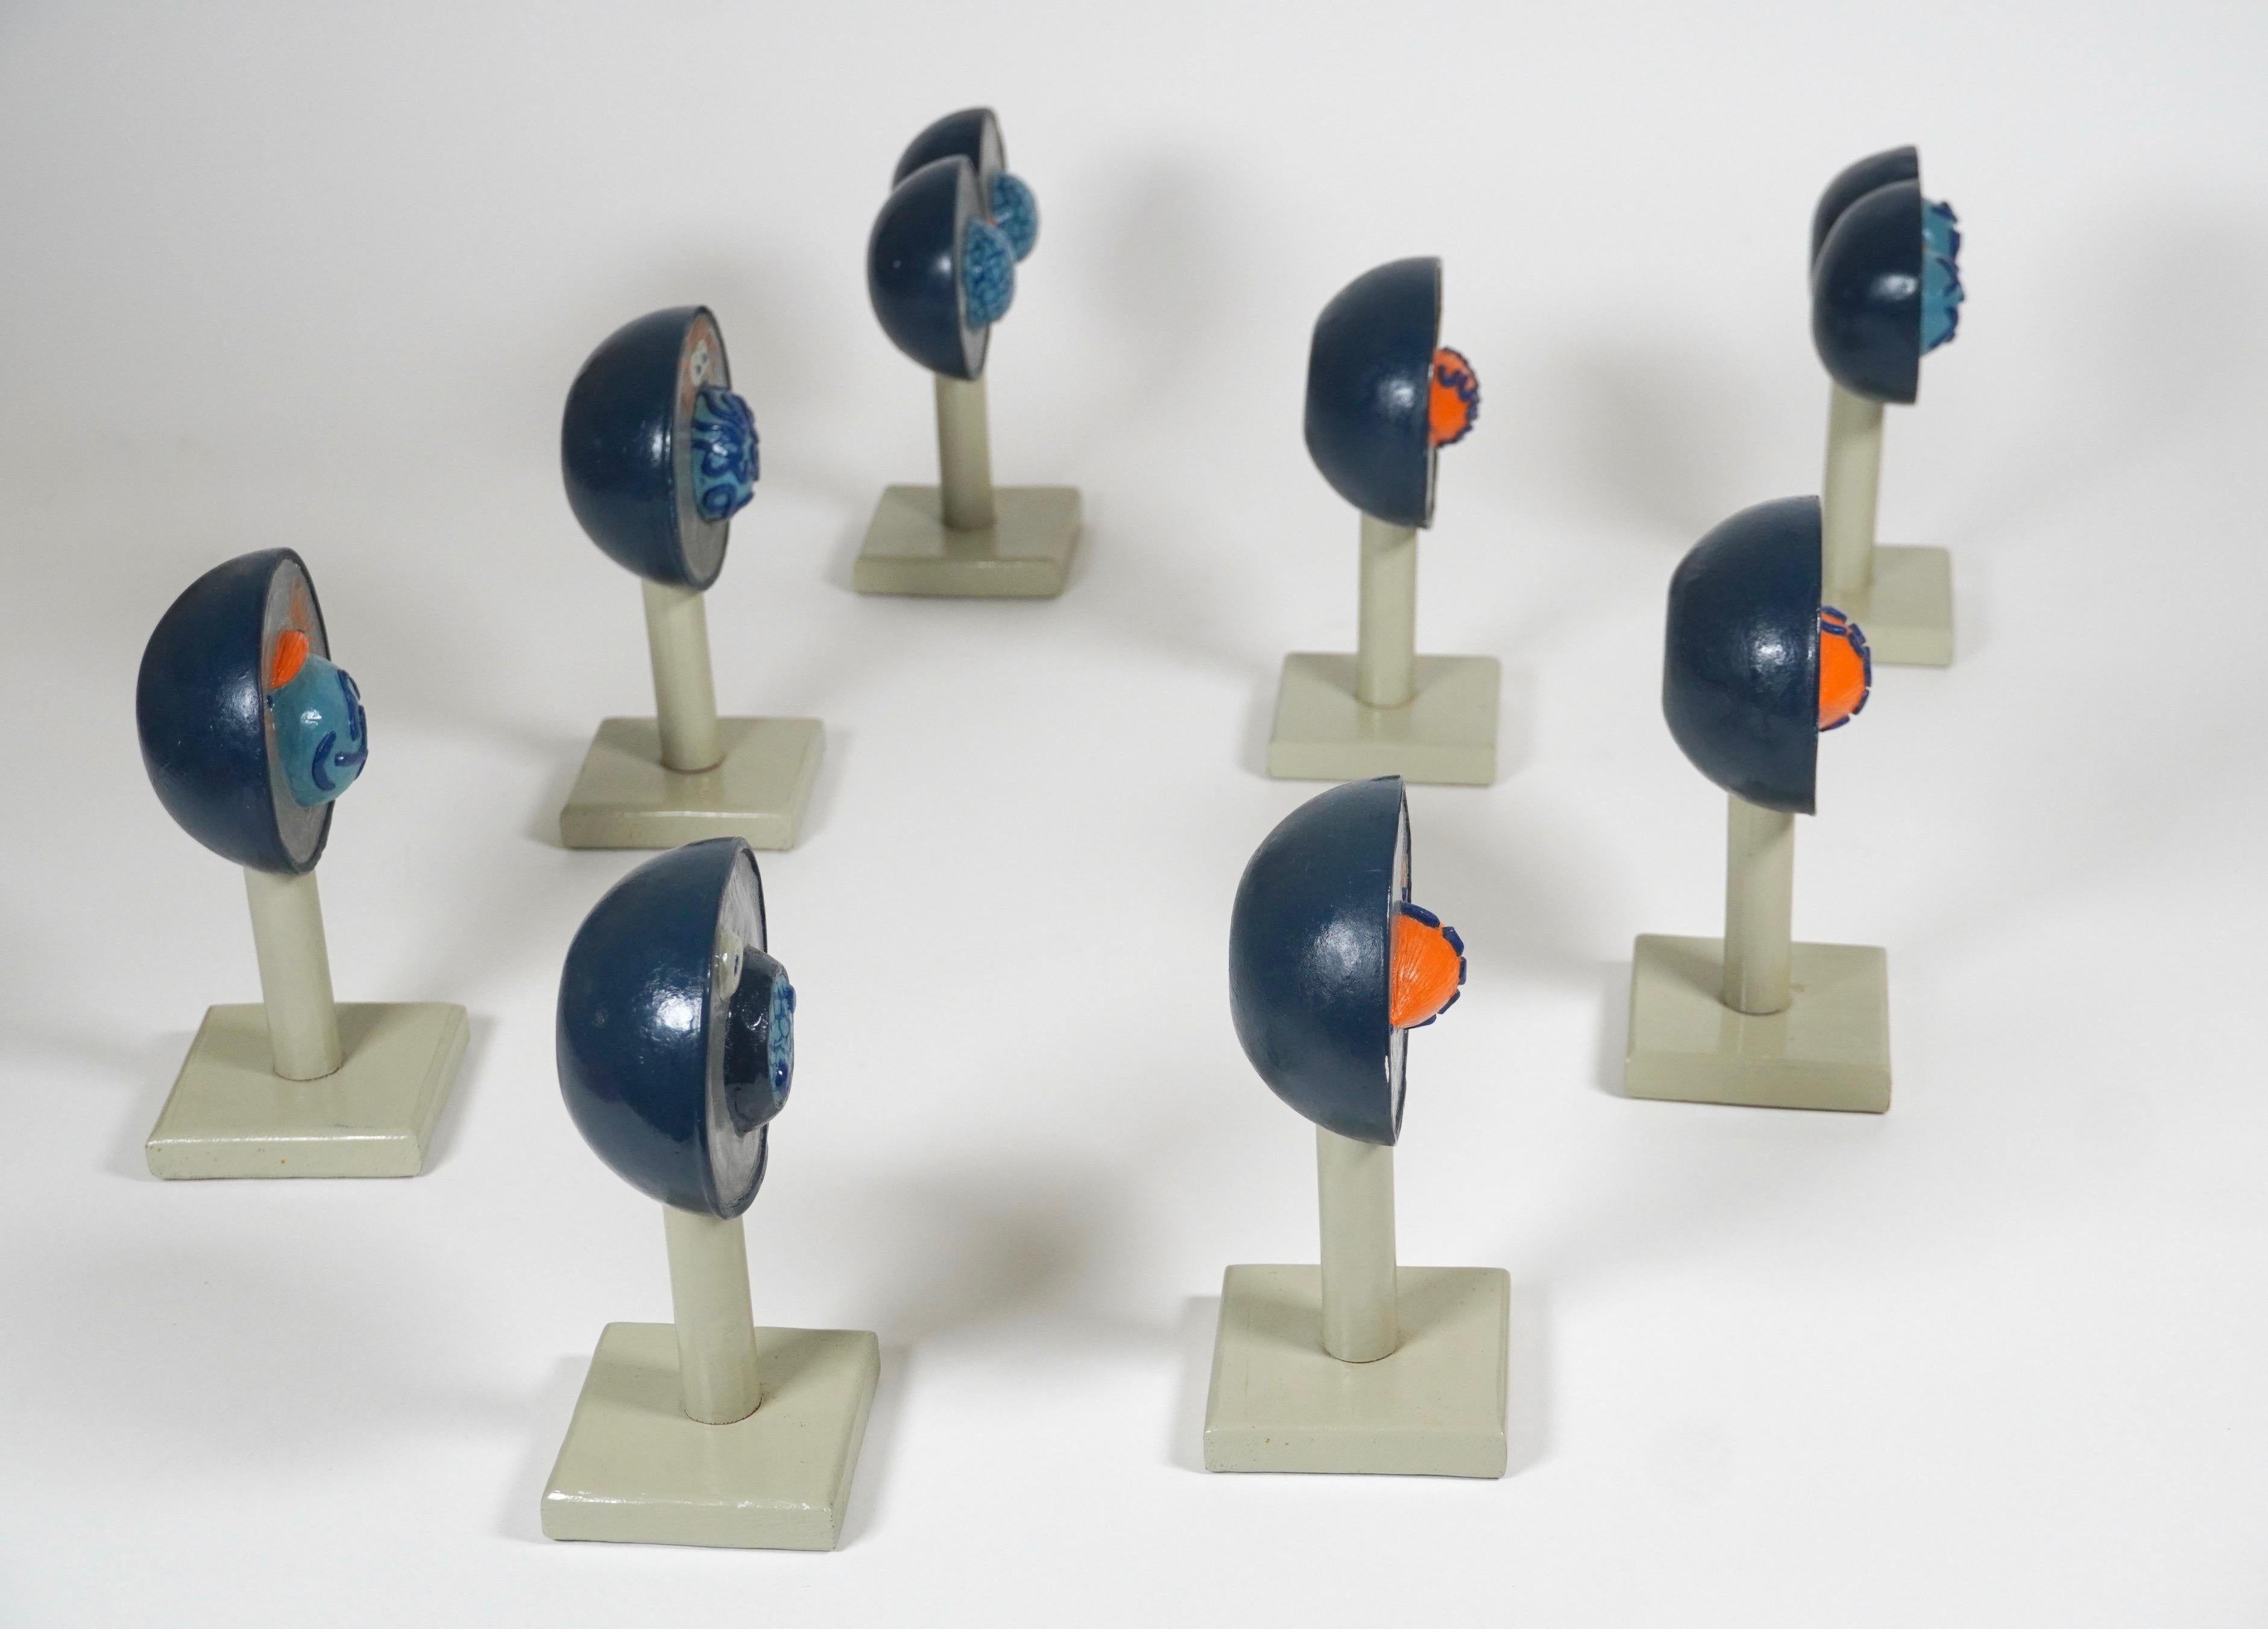 Hand-Crafted Set of Vintage 1960s Handmade Mitosis Scientific Models